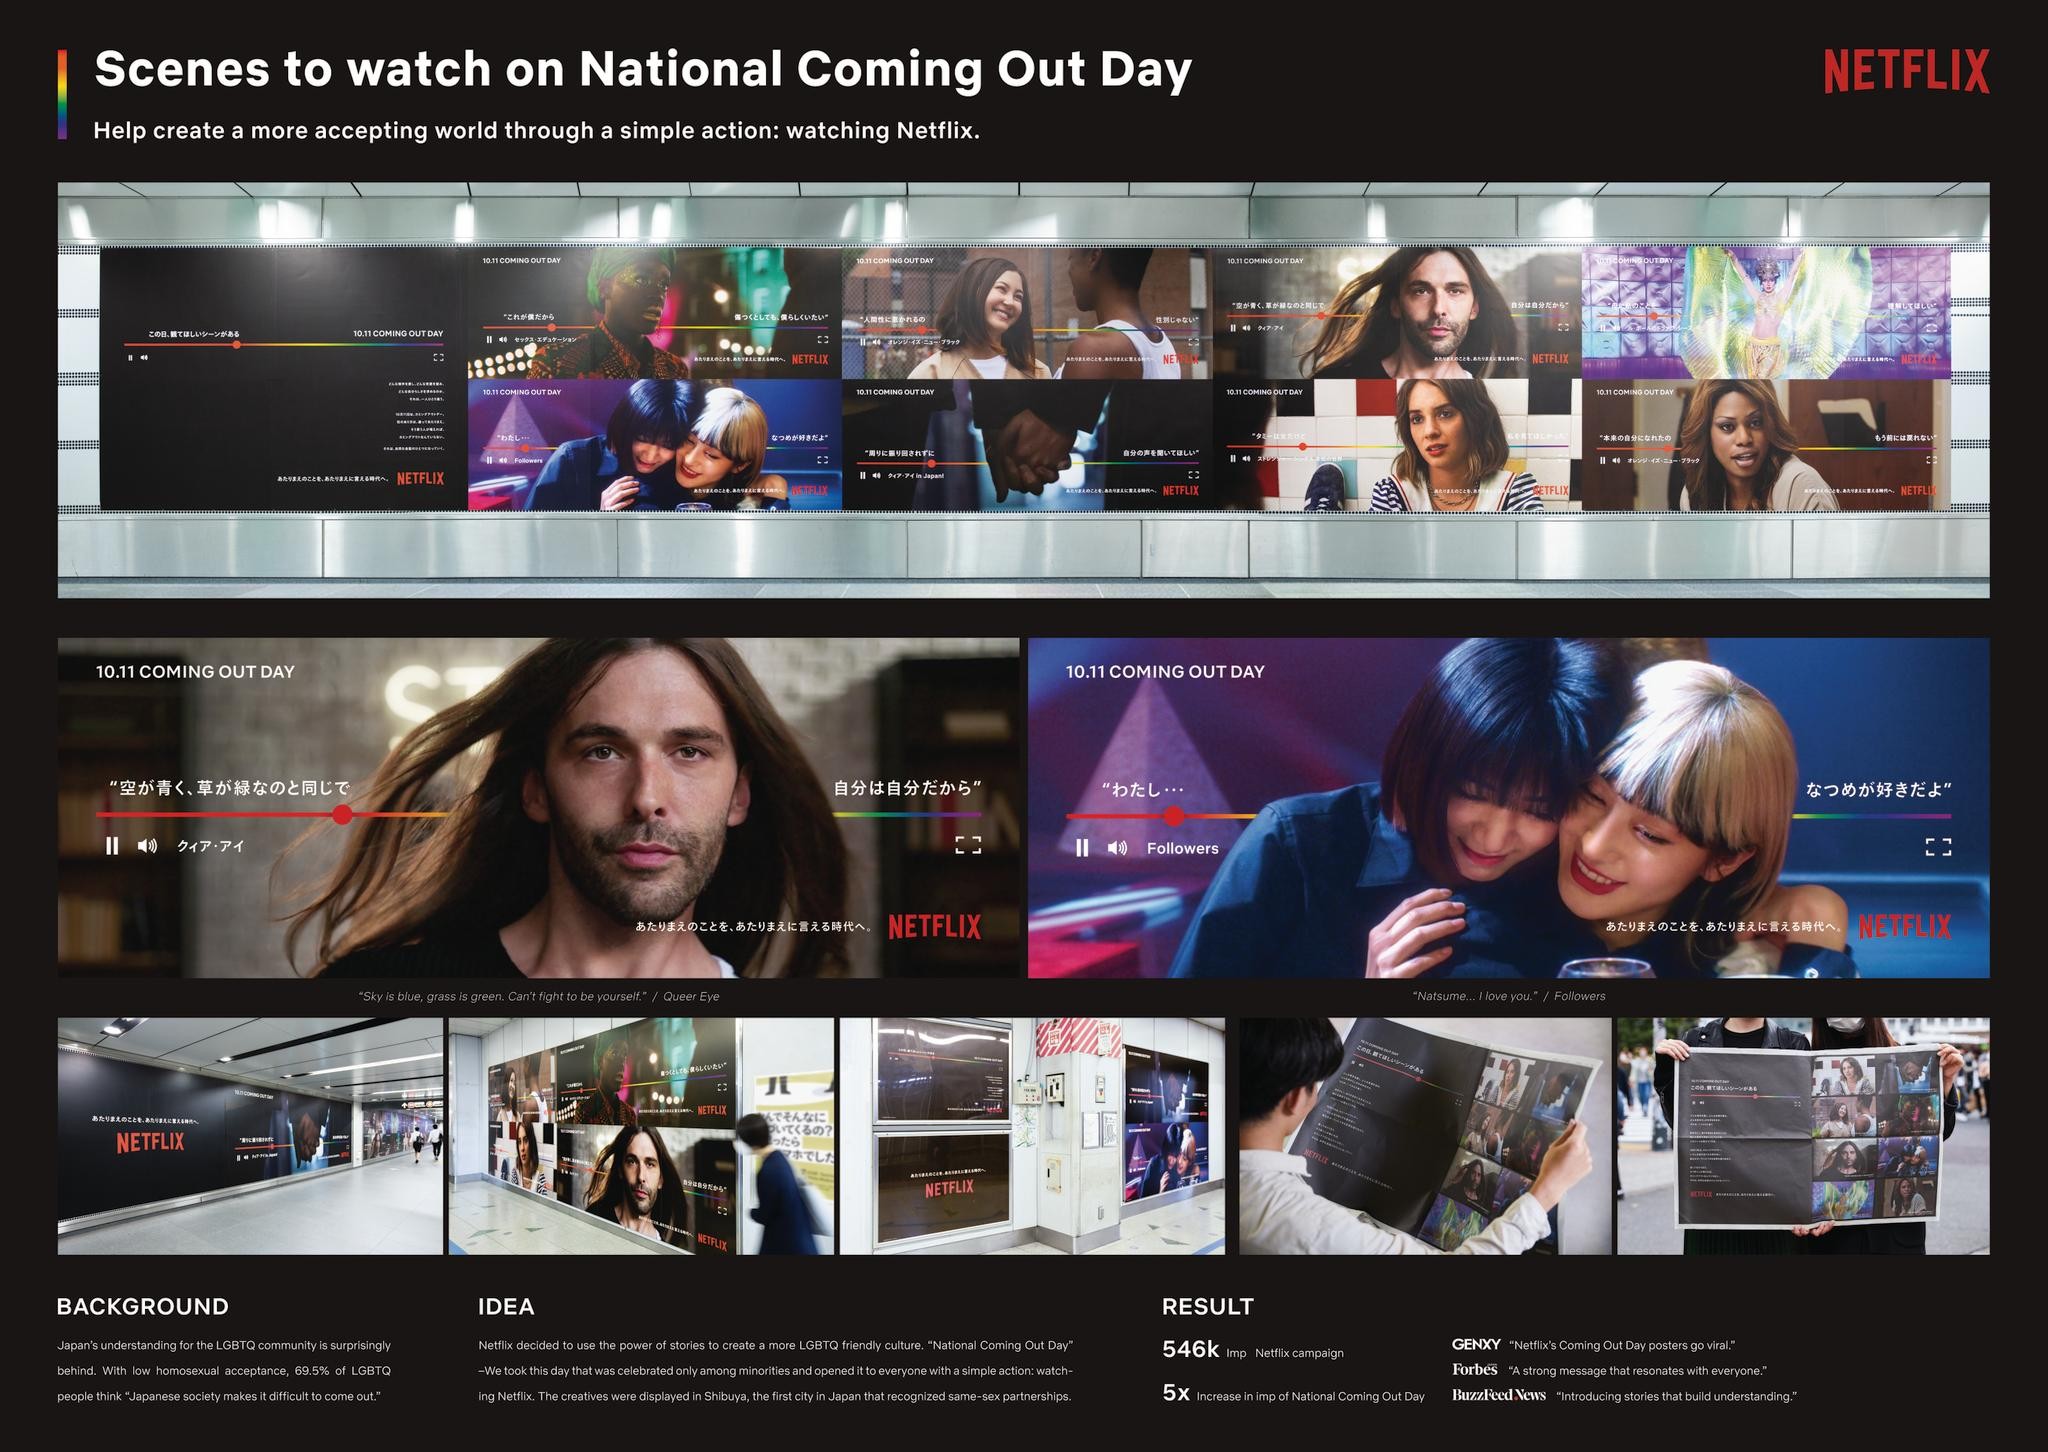 Scenes to watch on National Coming Out Day